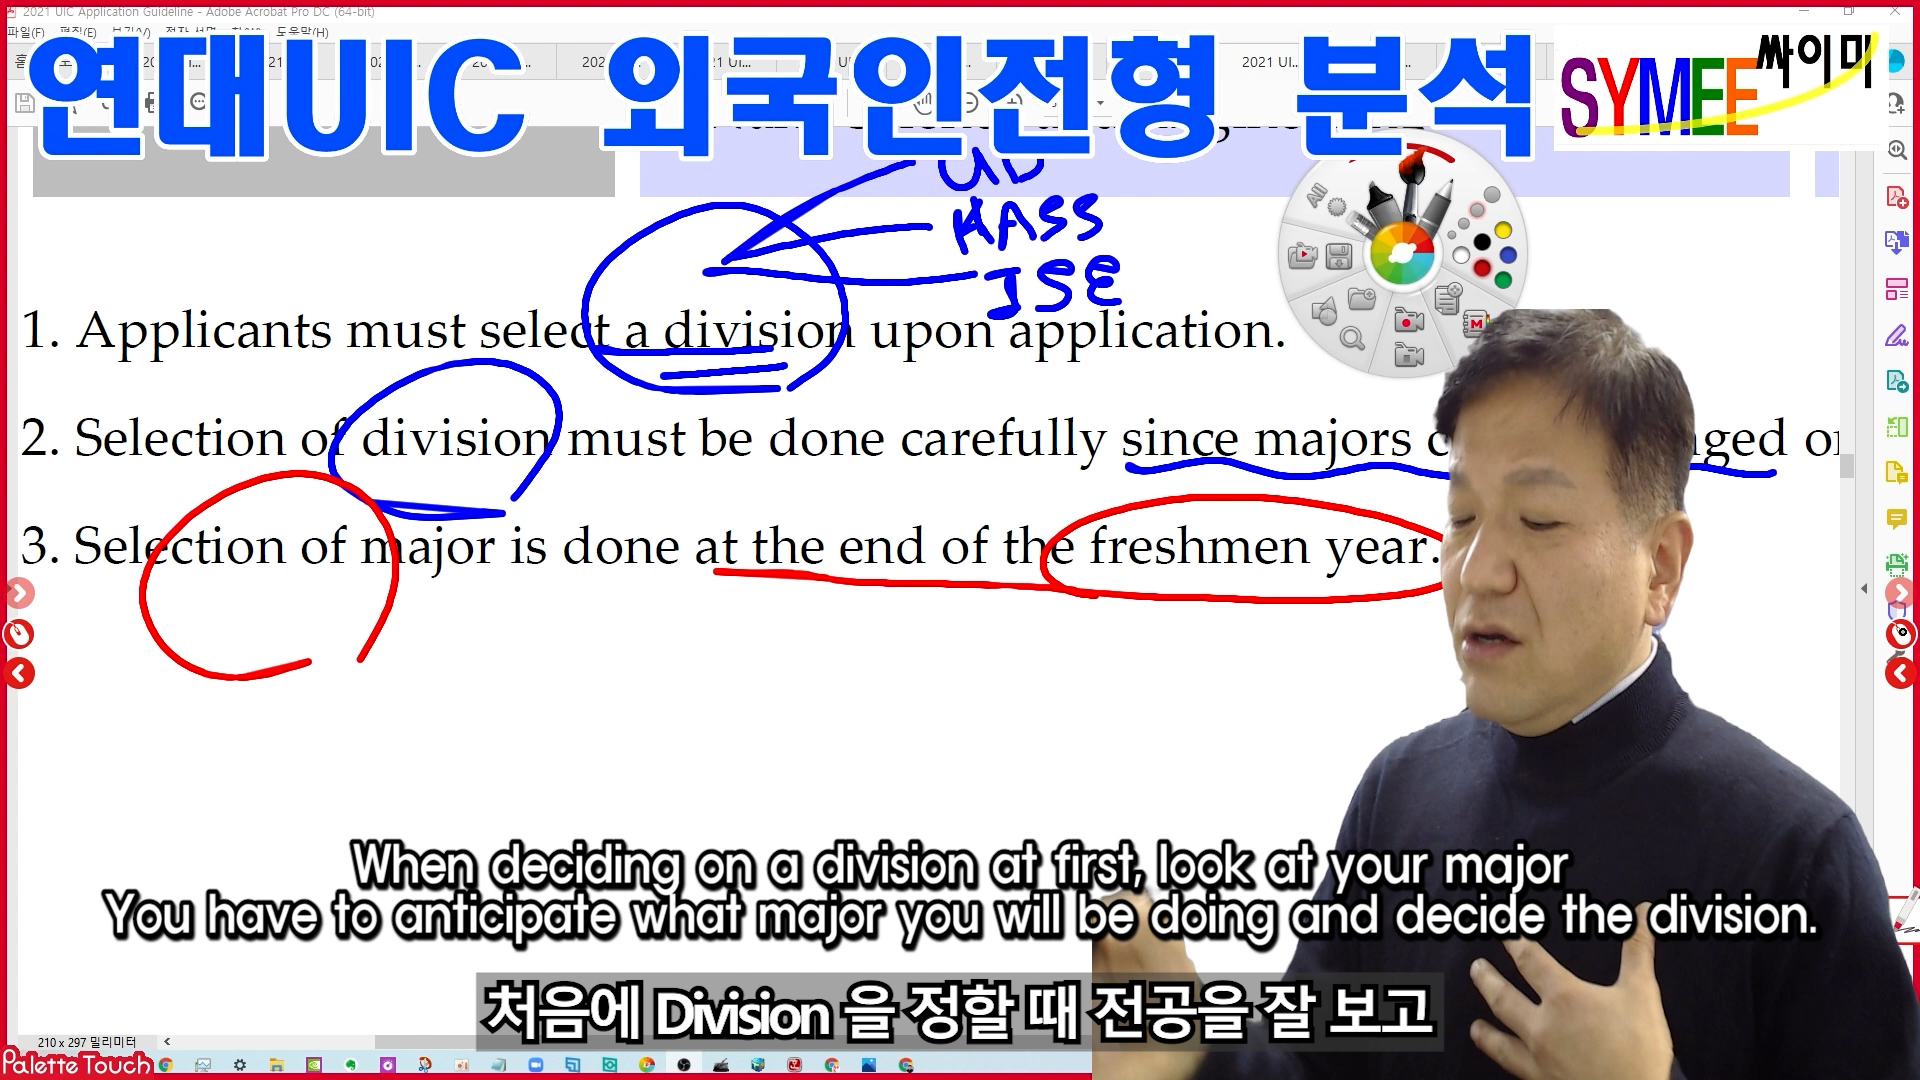 Yonsei Univ. Admission for UIC for Foreign Student 05 Majors.00_08_54_19.스틸 014.jpg